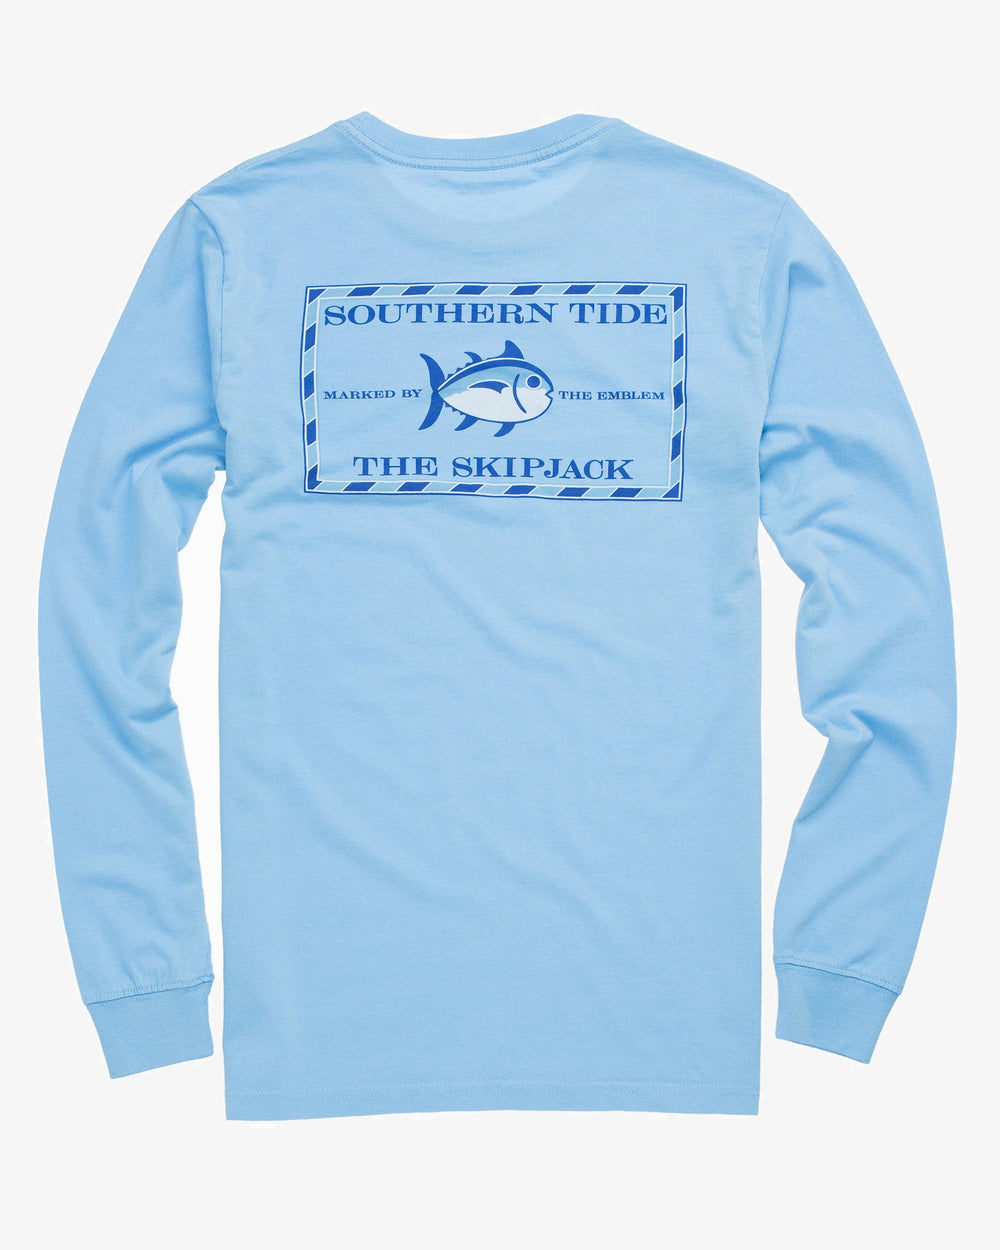 The back view of the Men's Blue Long Sleeve Original Skipjack T-shirt by Southern Tide - Ocean Channel